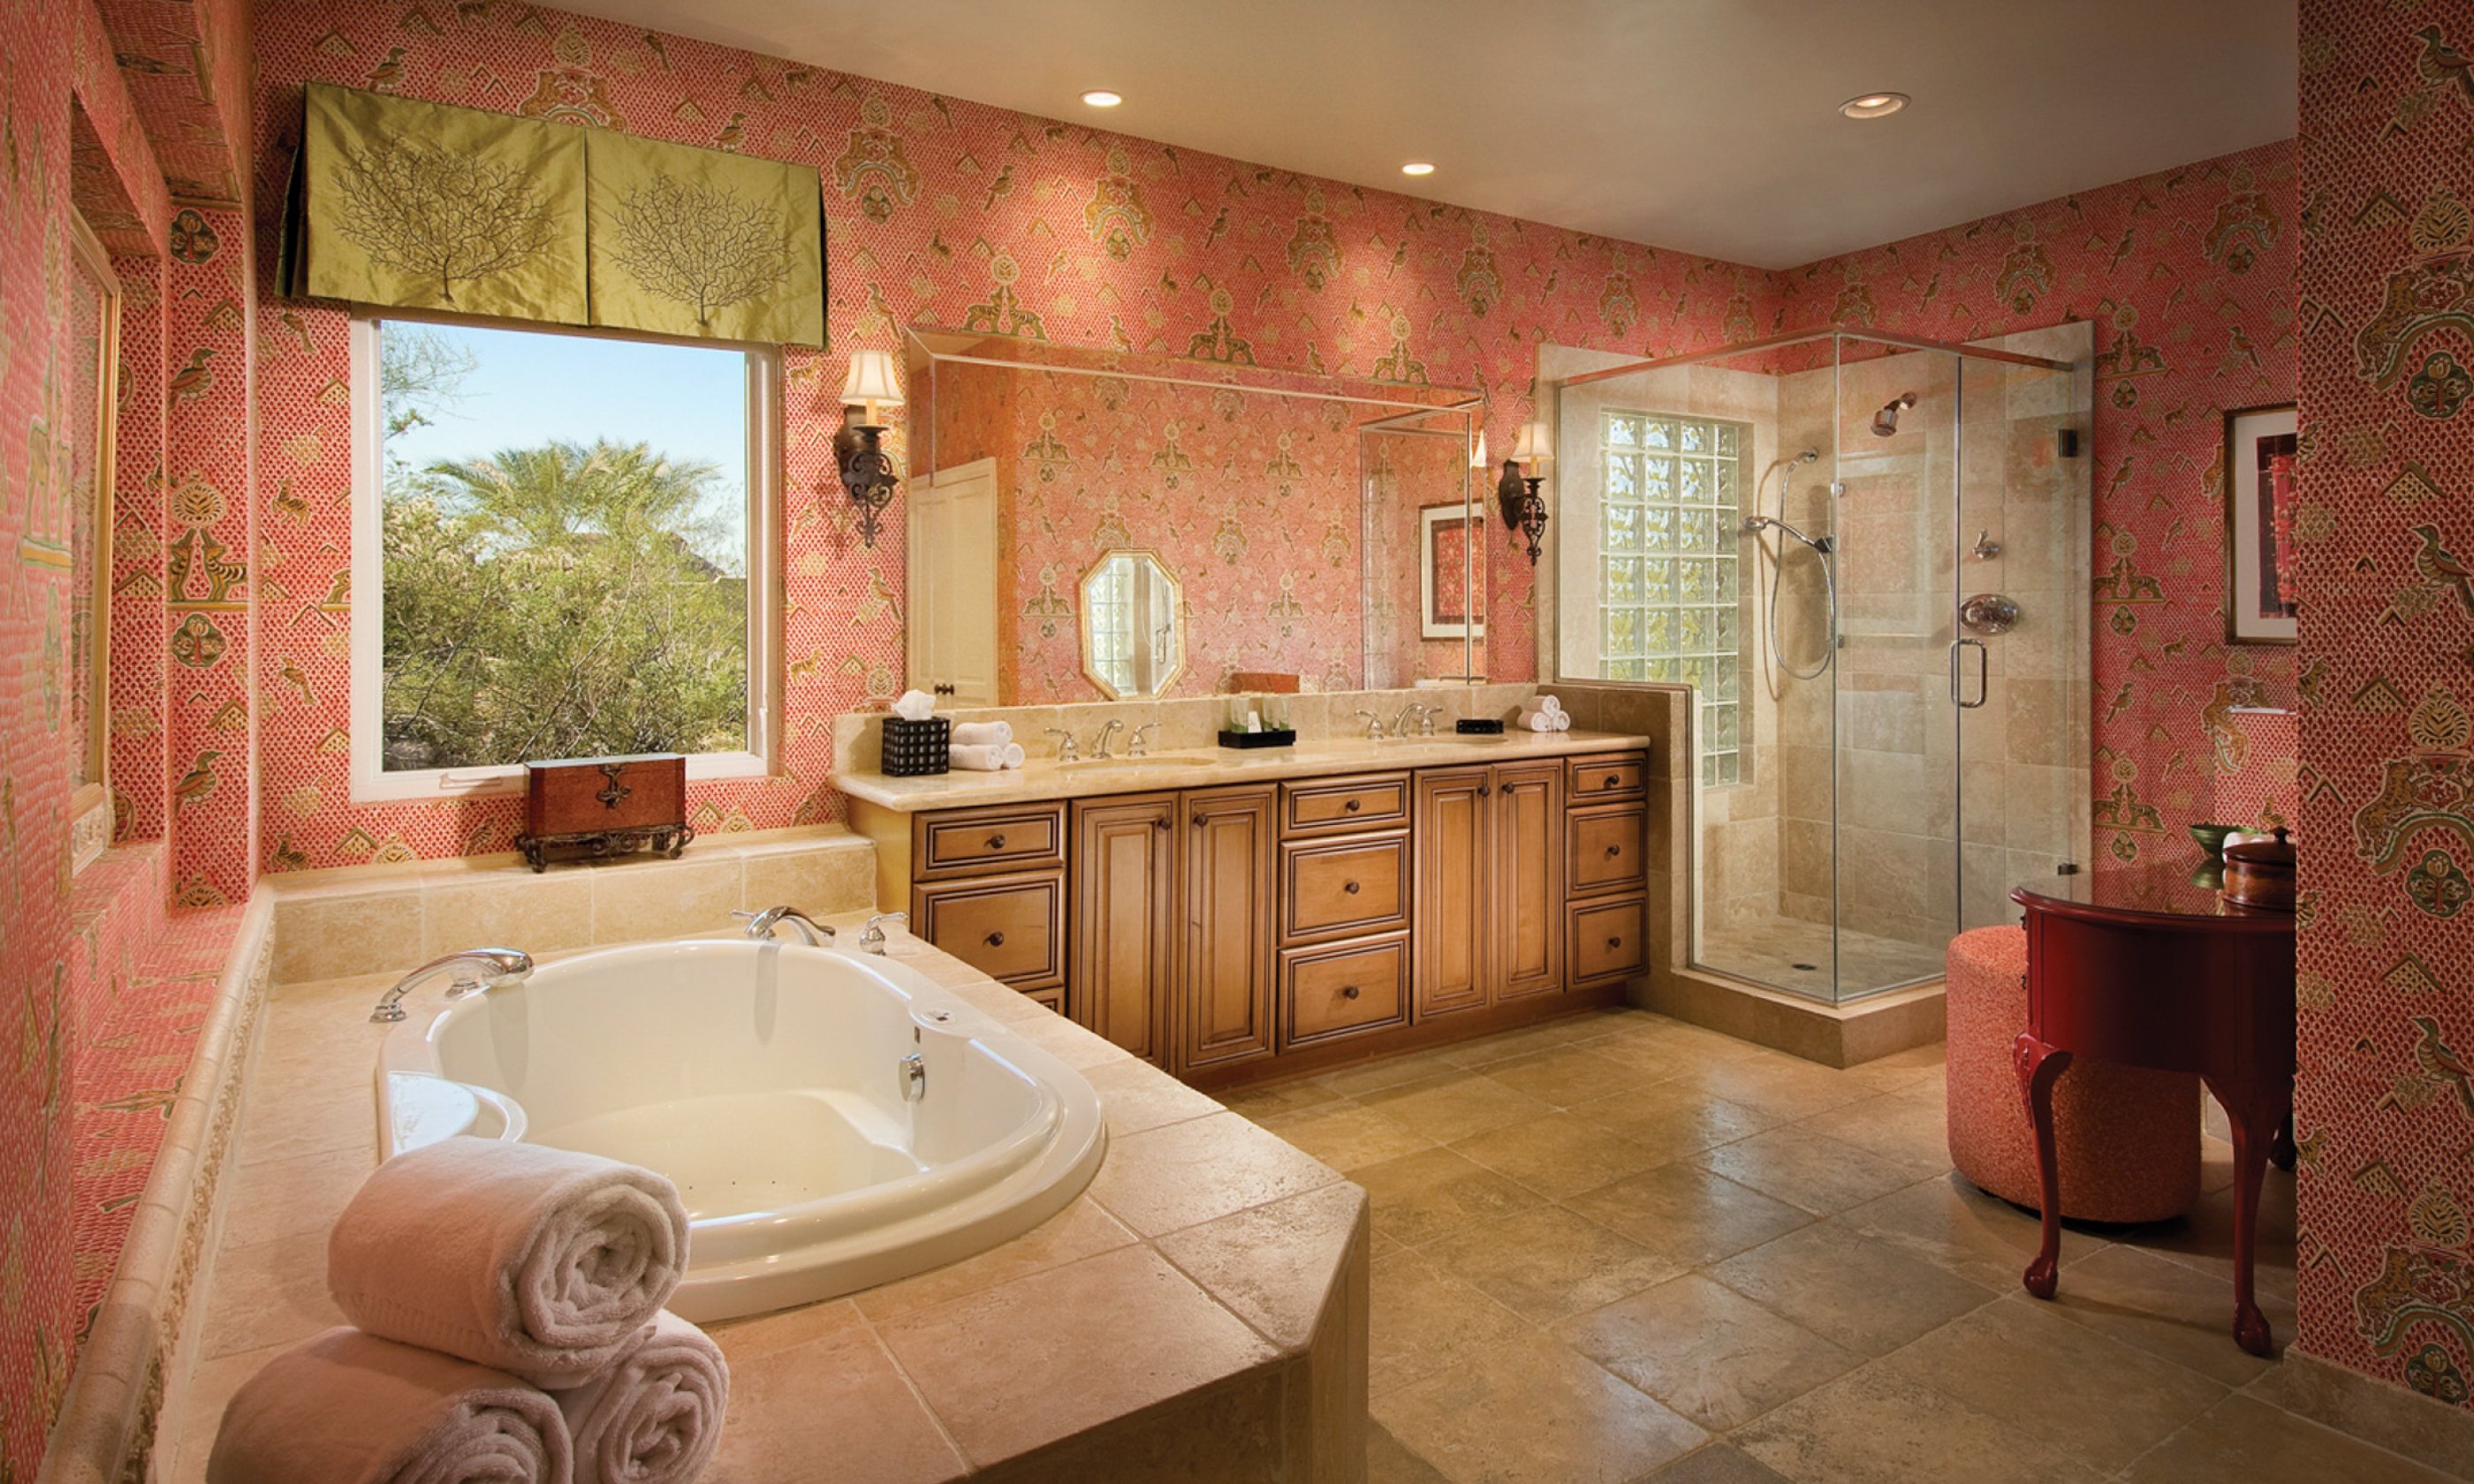 Bathroom with soaking tub, walk-in shower, two sinks and vanity.